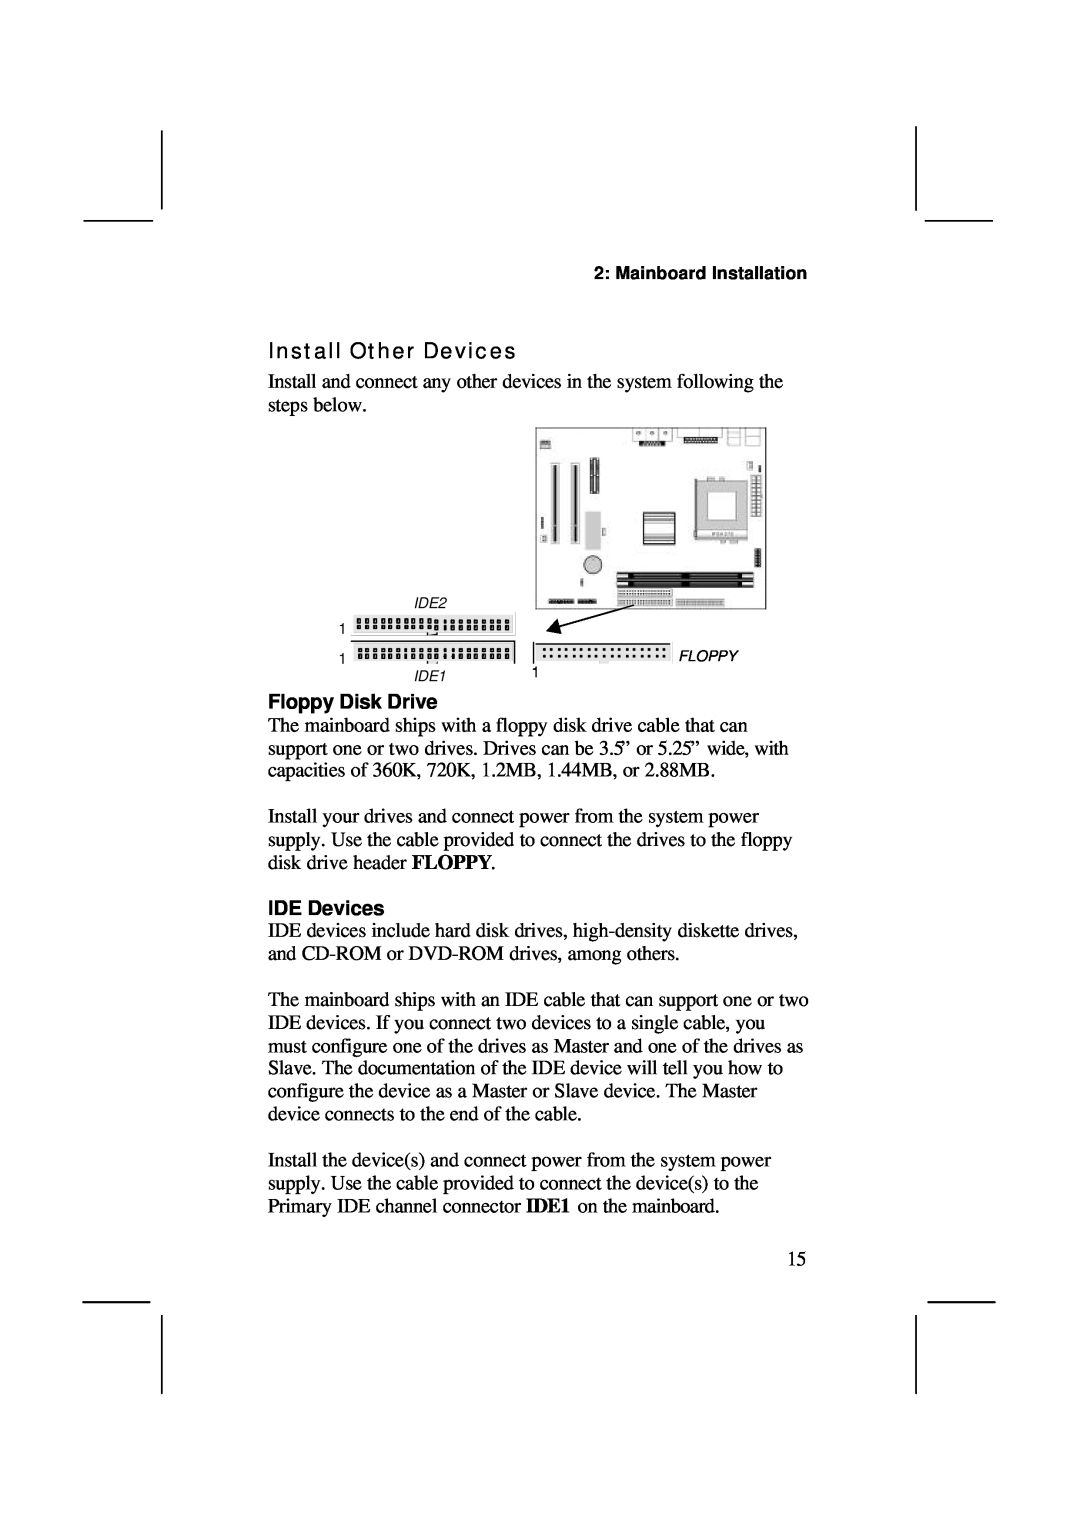 IBM MS7308D/E, V1.6 S63X/JUNE 2000 user manual Install Other Devices, Floppy Disk Drive, IDE Devices 